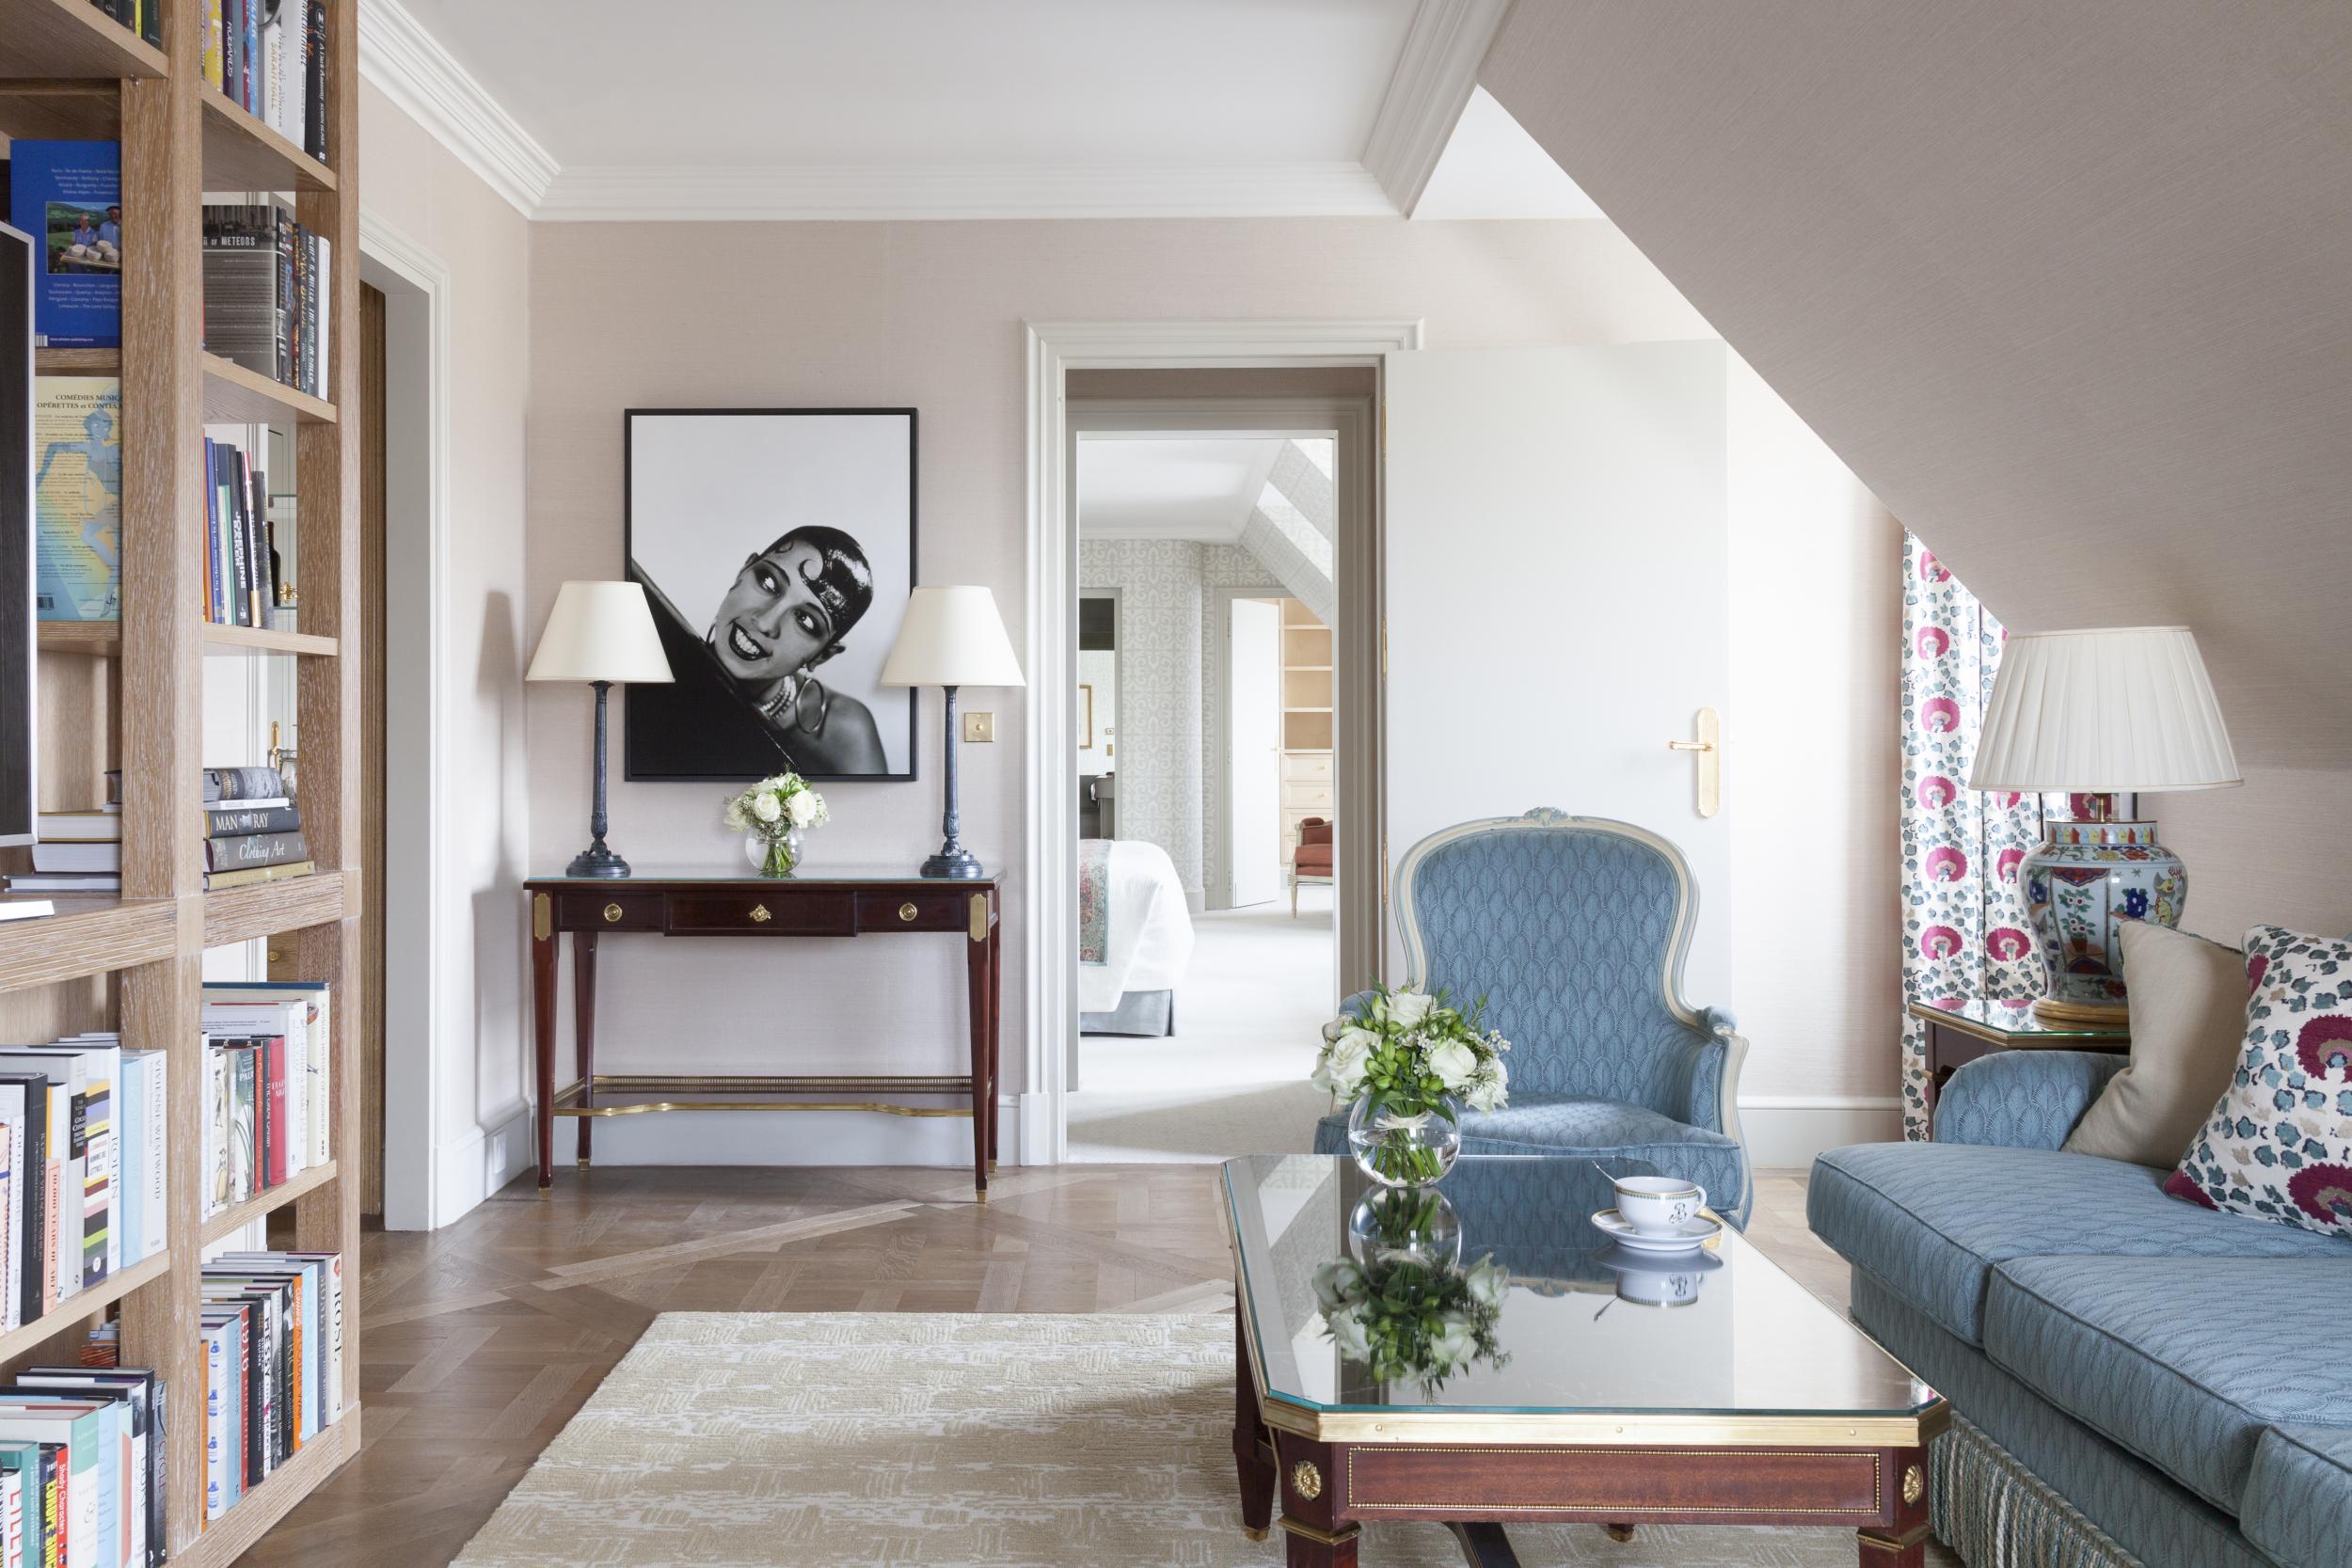 The new 1925 Suite pays homage to Josephine Baker